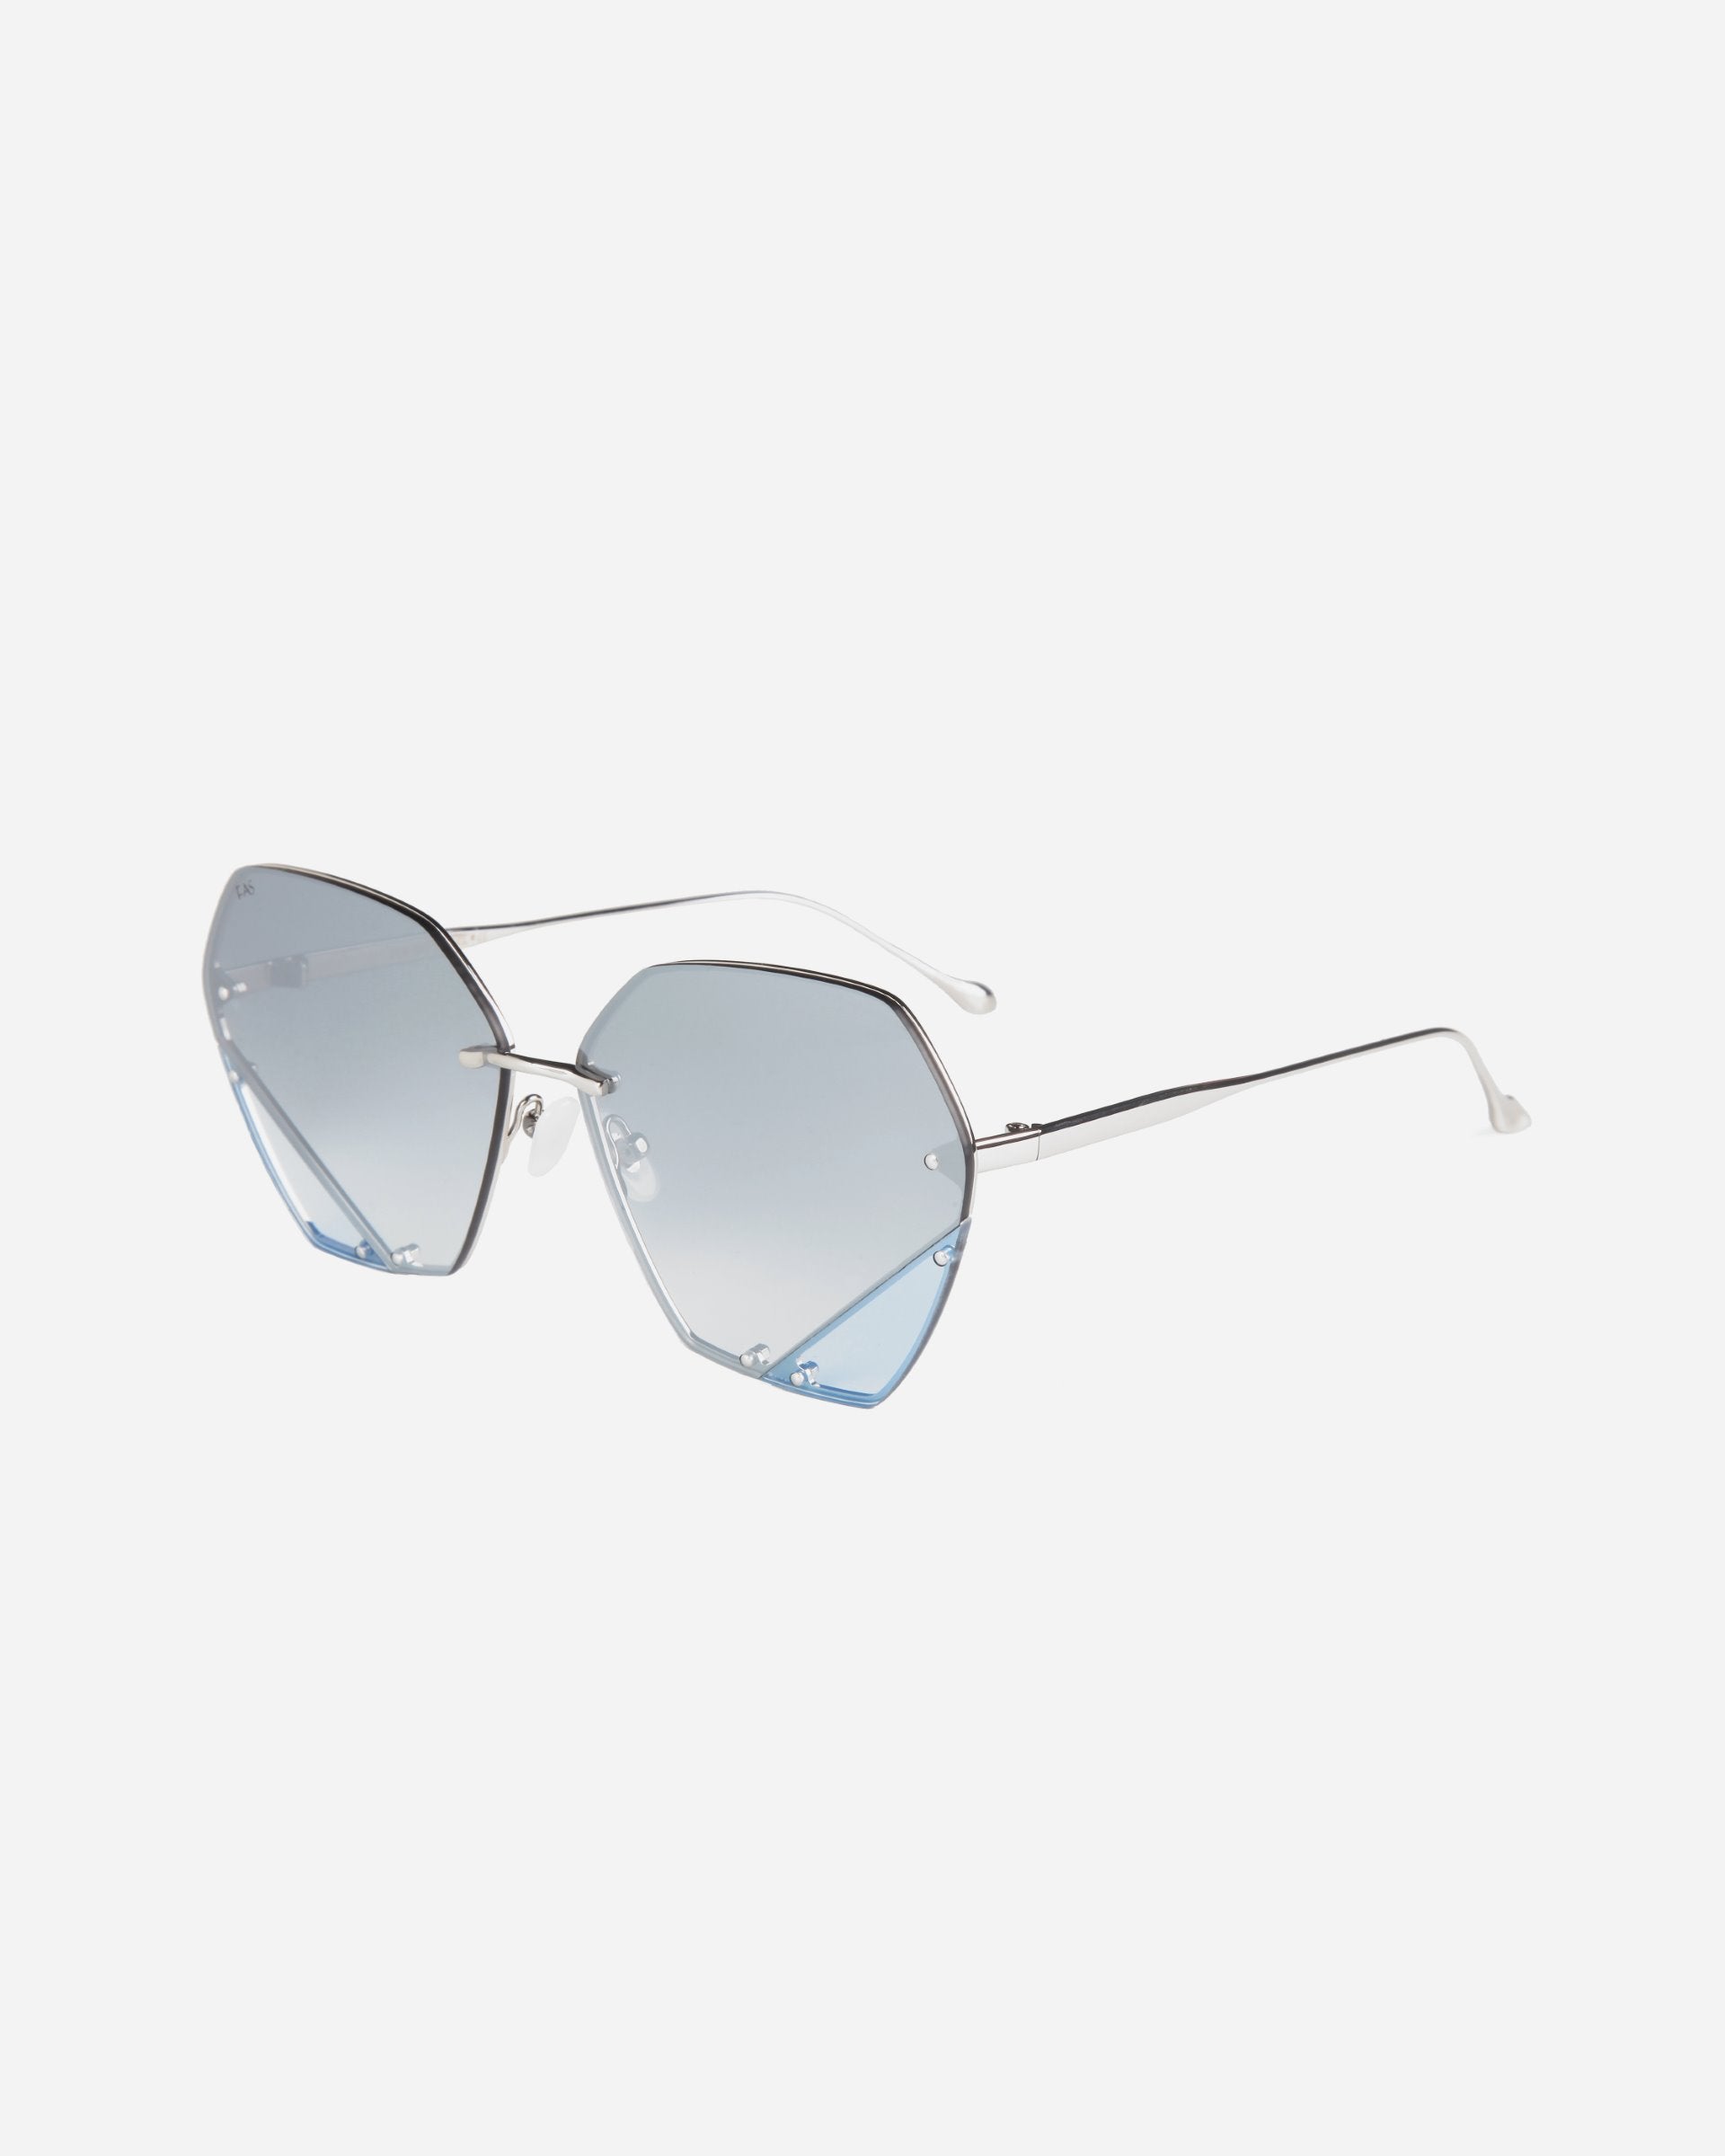 A pair of stylish sunglasses with hexagonal, gradient blue lenses and thin silver metal frames. Featuring jadestone nosepads for added comfort, the design is modern and minimalistic, providing a chic look - the Icy by For Art's Sake®.